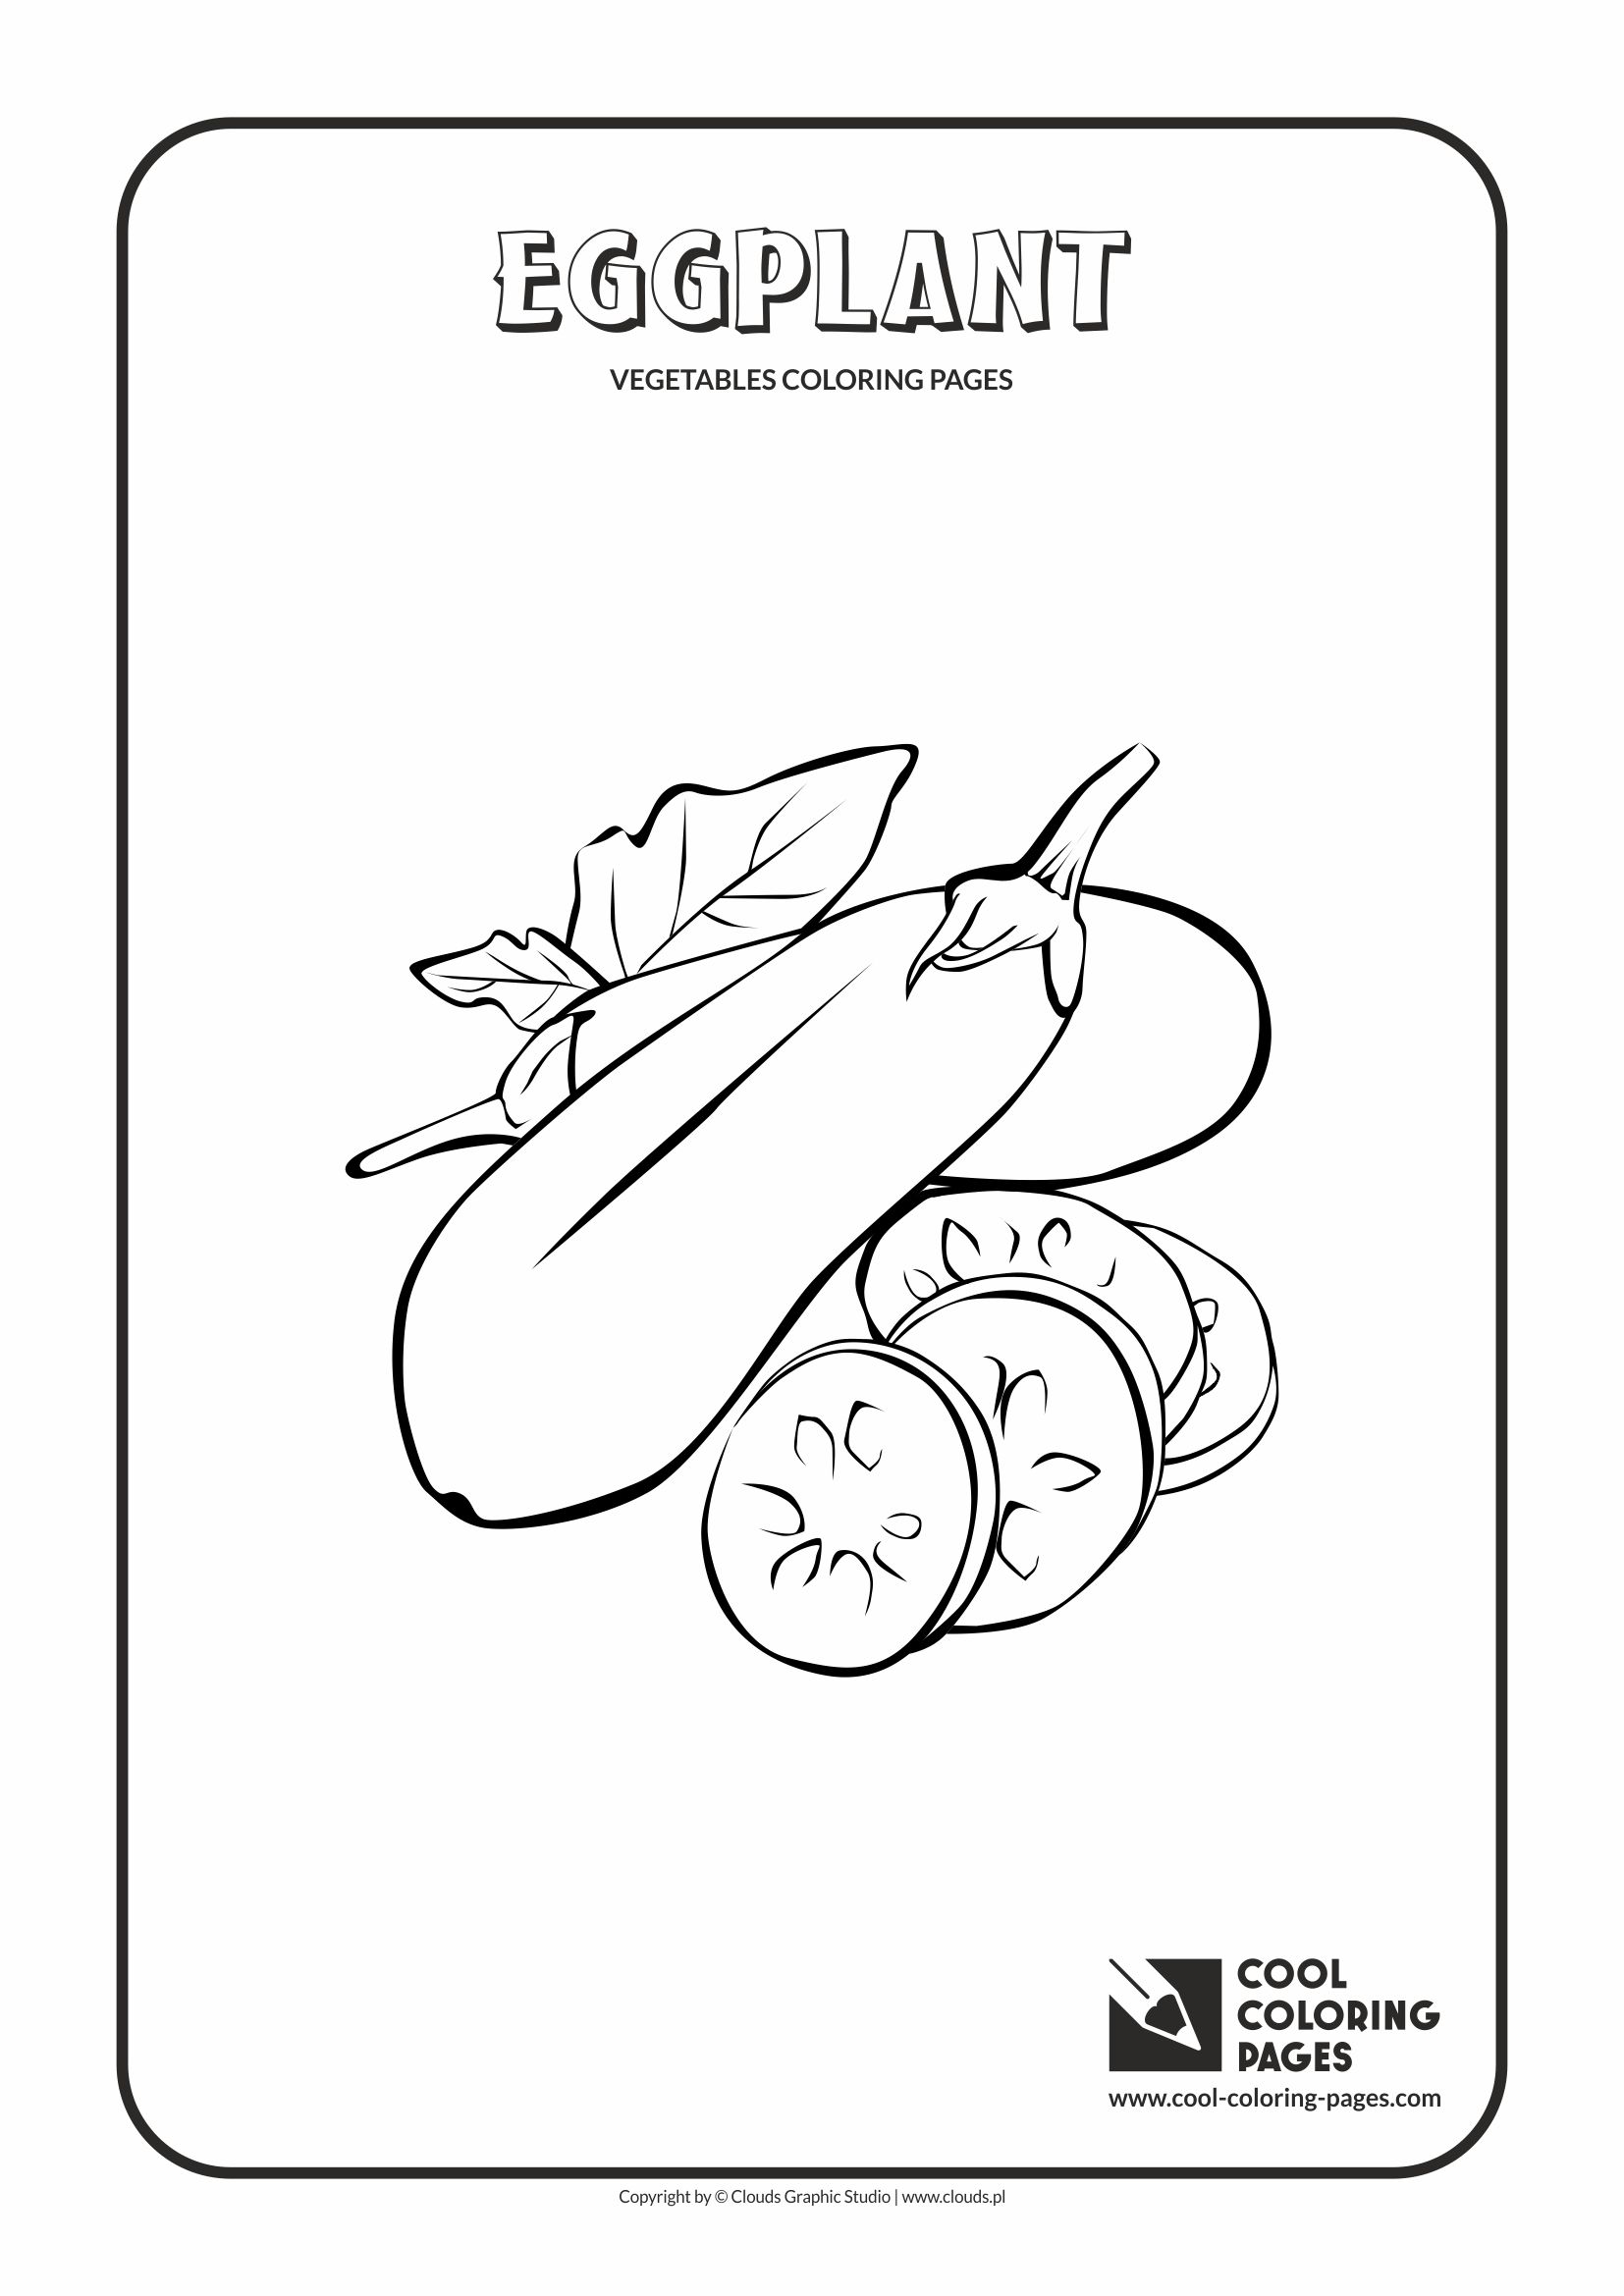 Cool Coloring Pages - Plants / Eggplant / Coloring page with eggplant